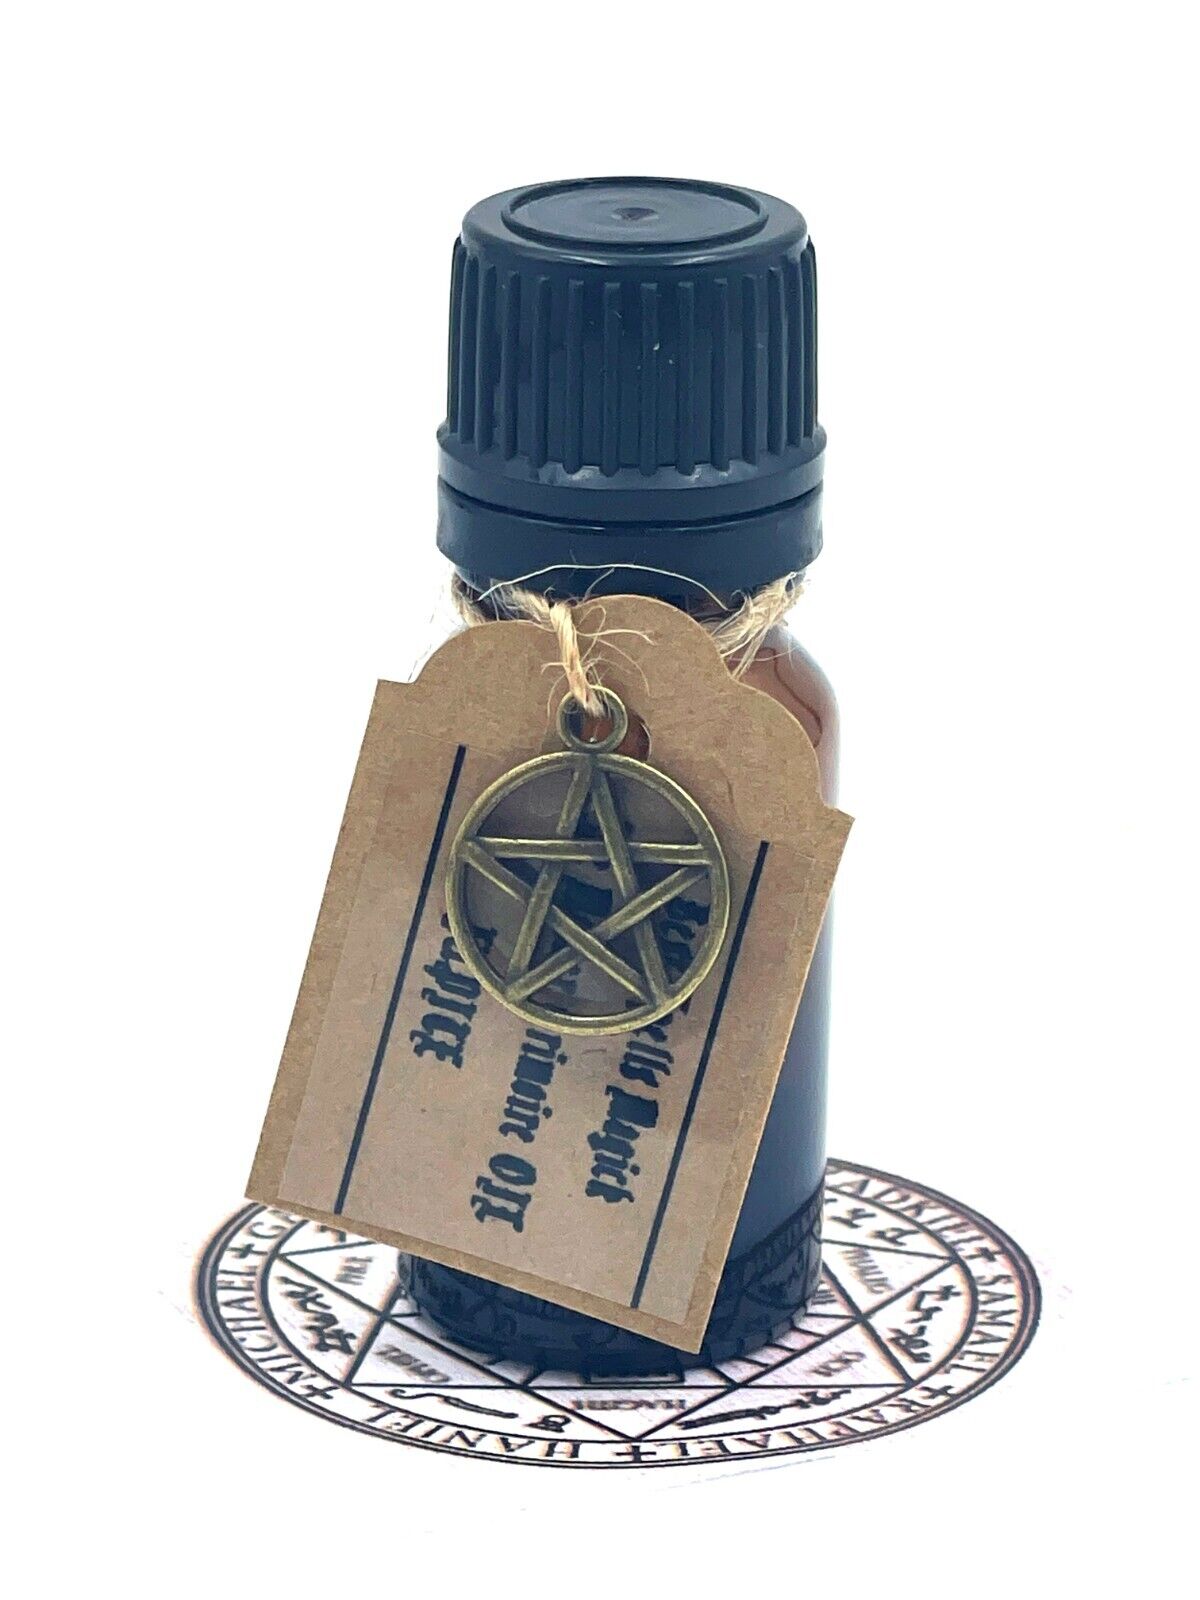 Necronomicon Oil is Inspired by H.P. Lovecraft by Best Spells Magick/Handcrafted